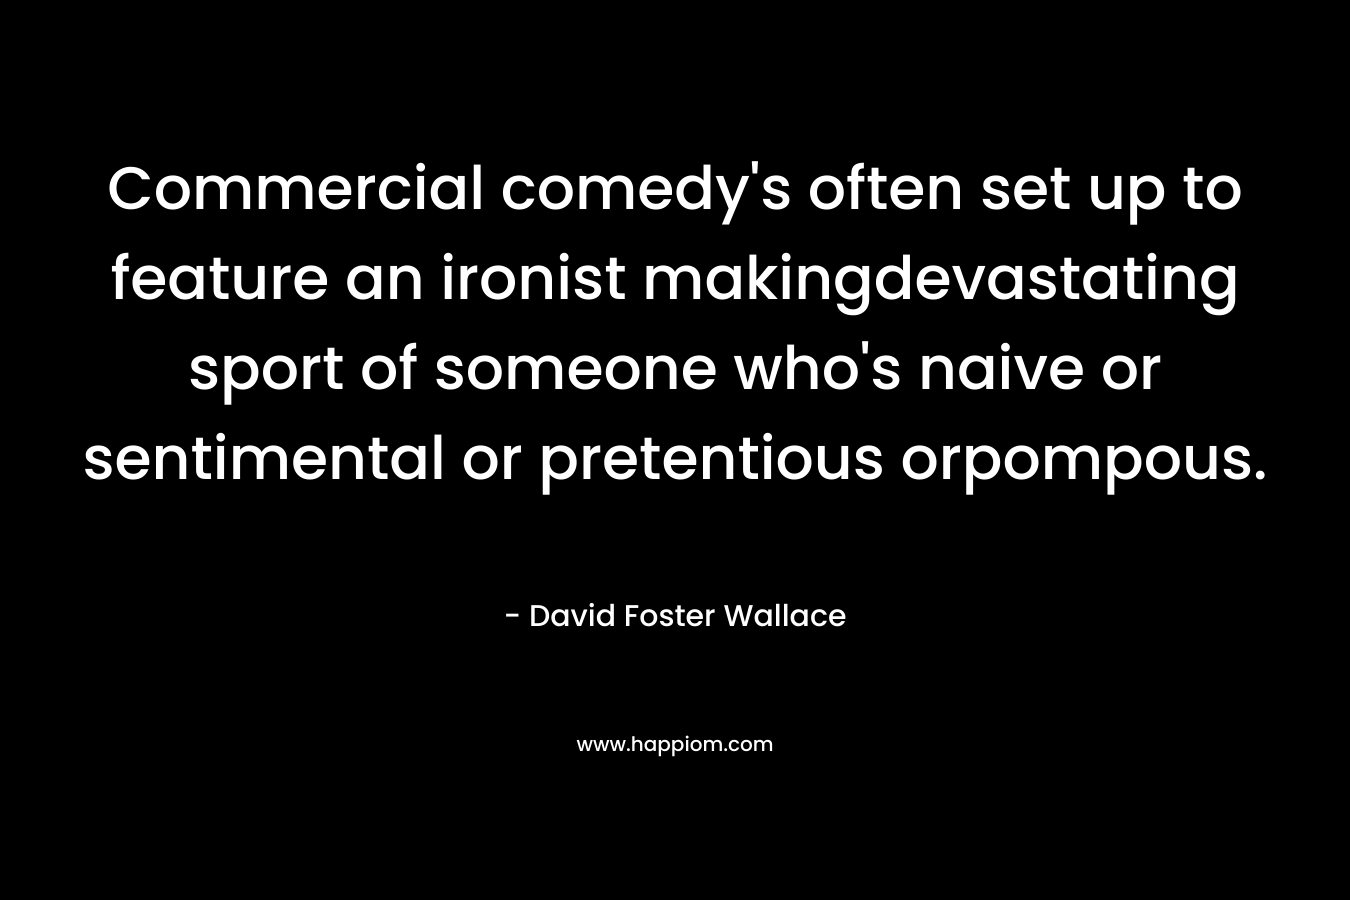 Commercial comedy’s often set up to feature an ironist makingdevastating sport of someone who’s naive or sentimental or pretentious orpompous. – David Foster Wallace